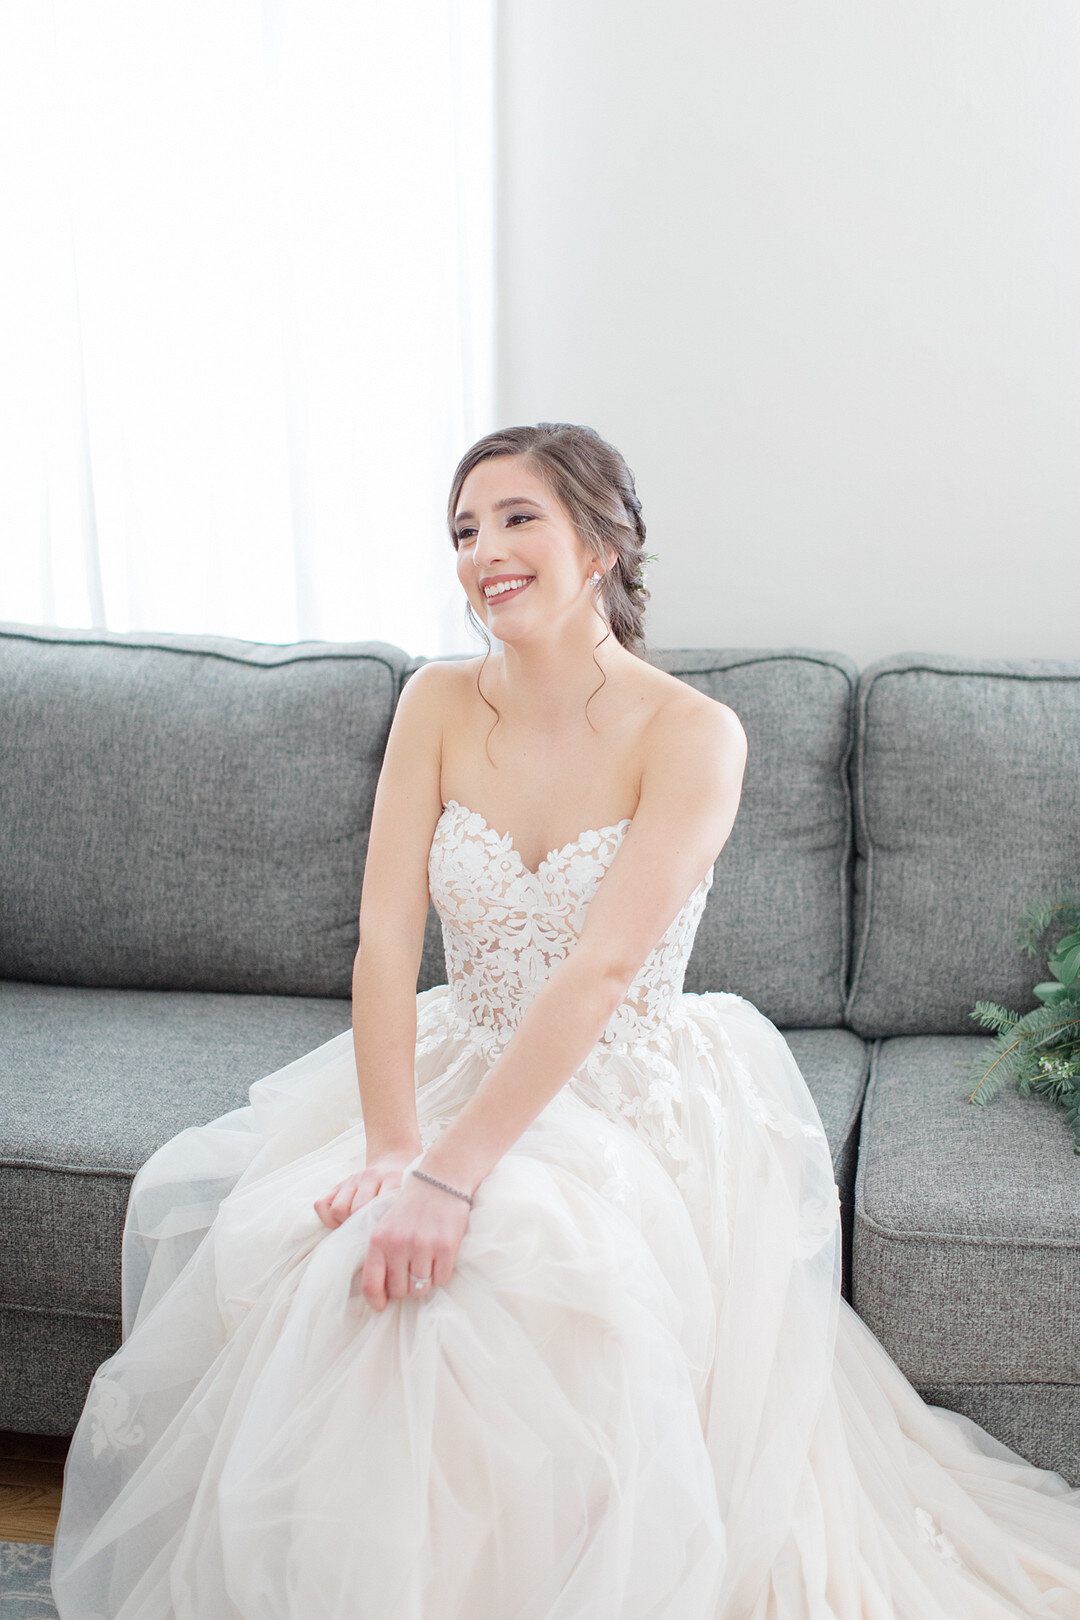 Shelly and Steve's Whimsical Winter Wedding at Riverdale Manor